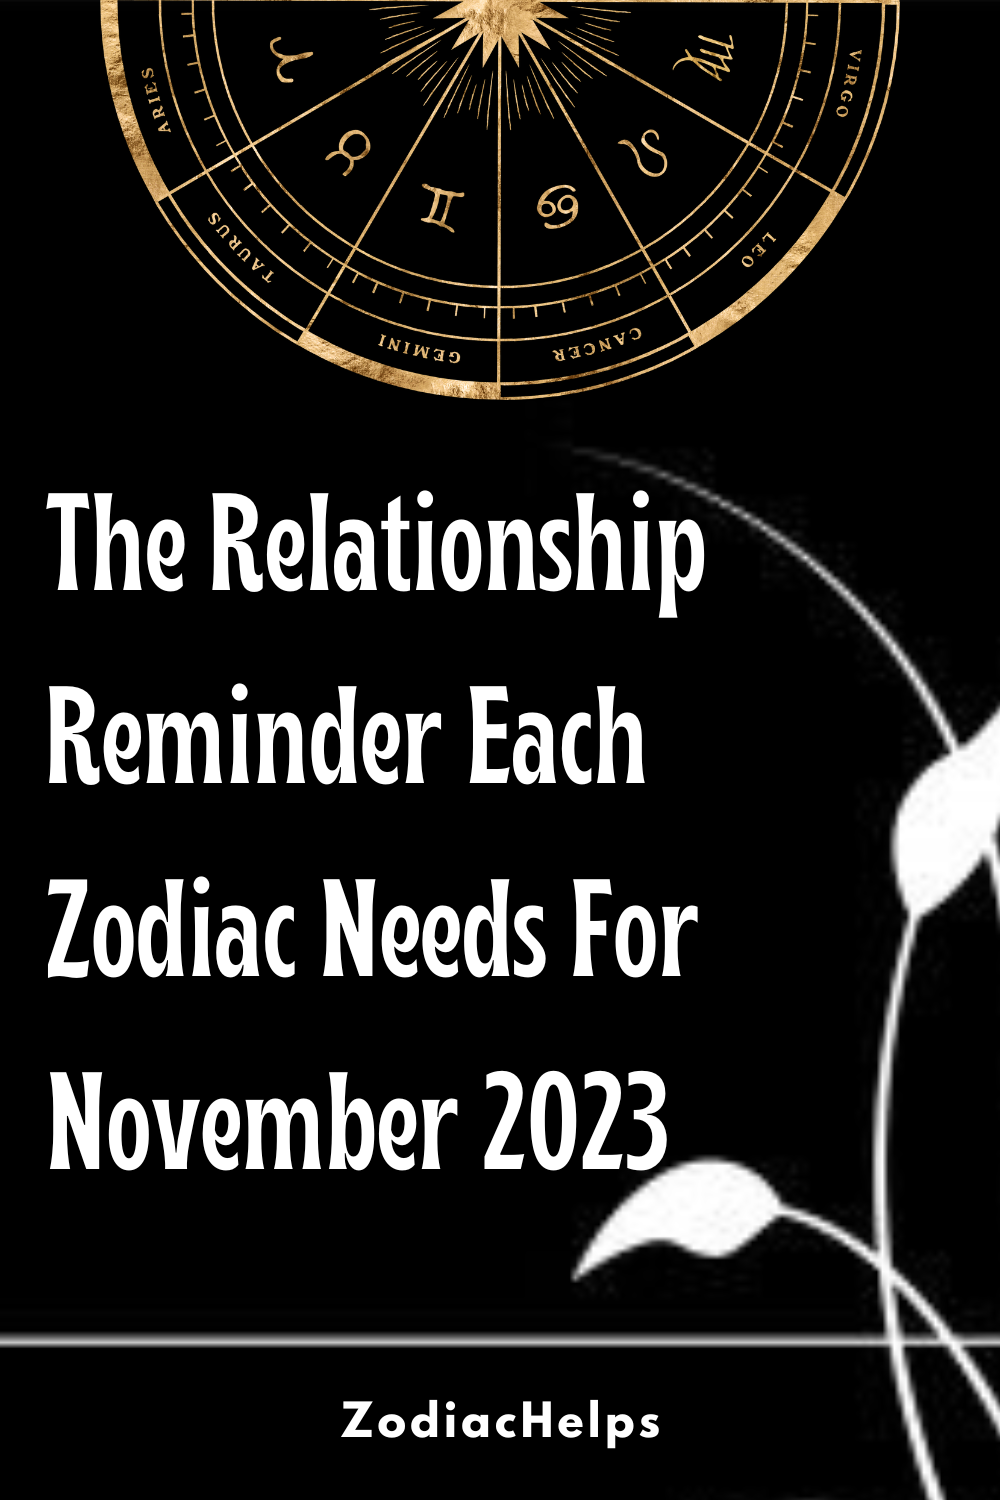 The Relationship Reminder Each Zodiac Needs For November 2023